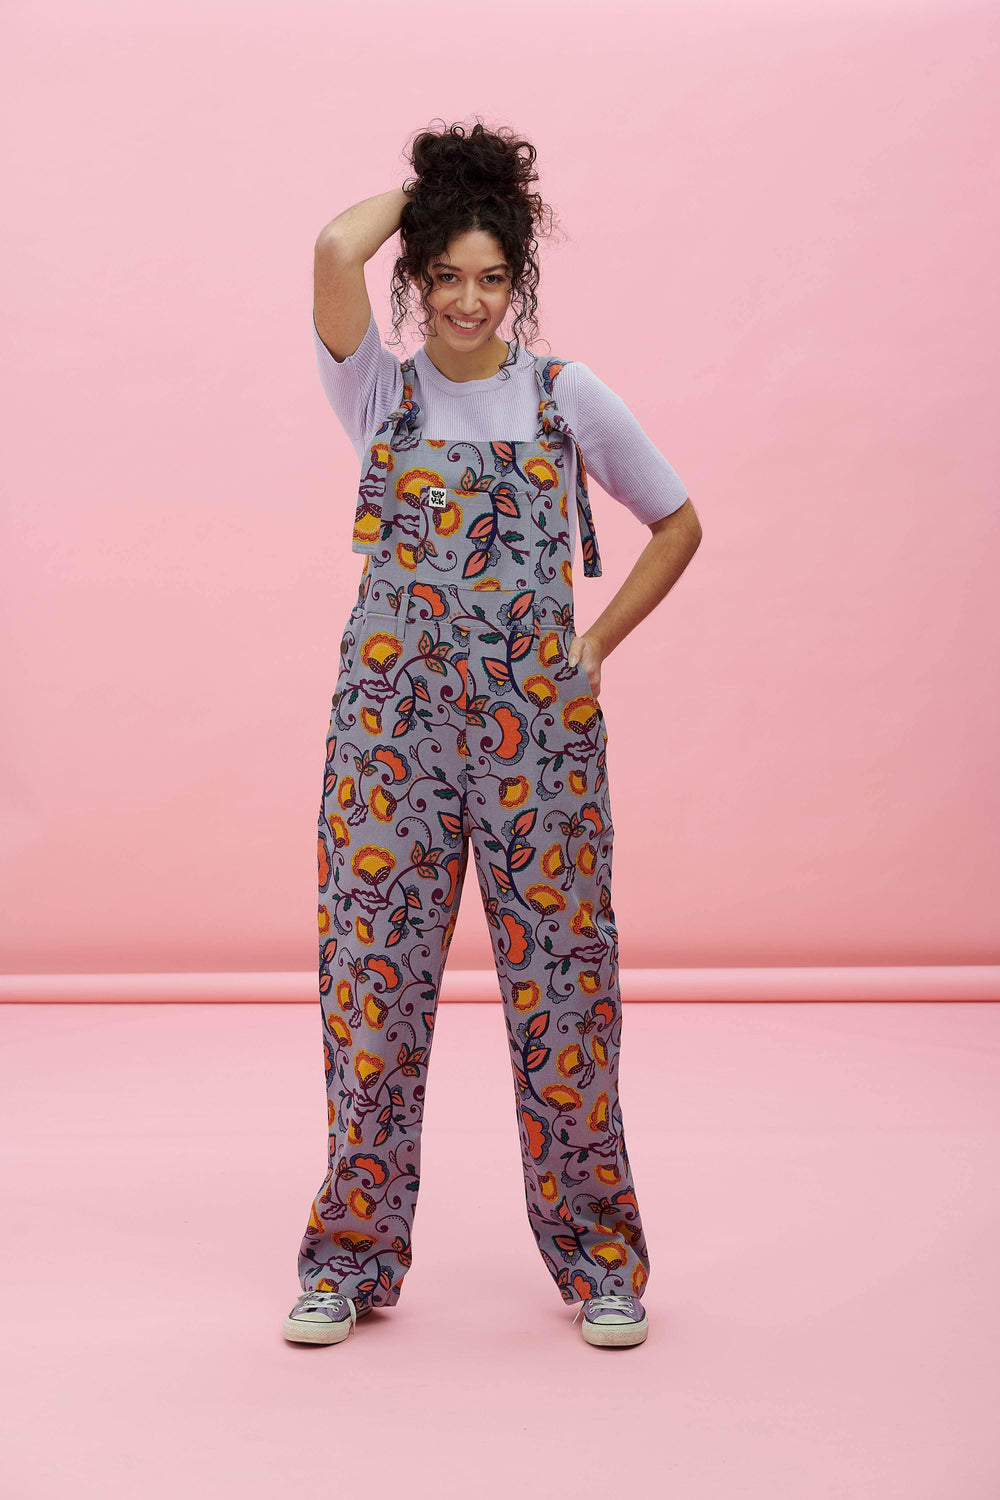 Lucy and Yak | Independent Handmade Dungarees, Trousers & Clothing UK